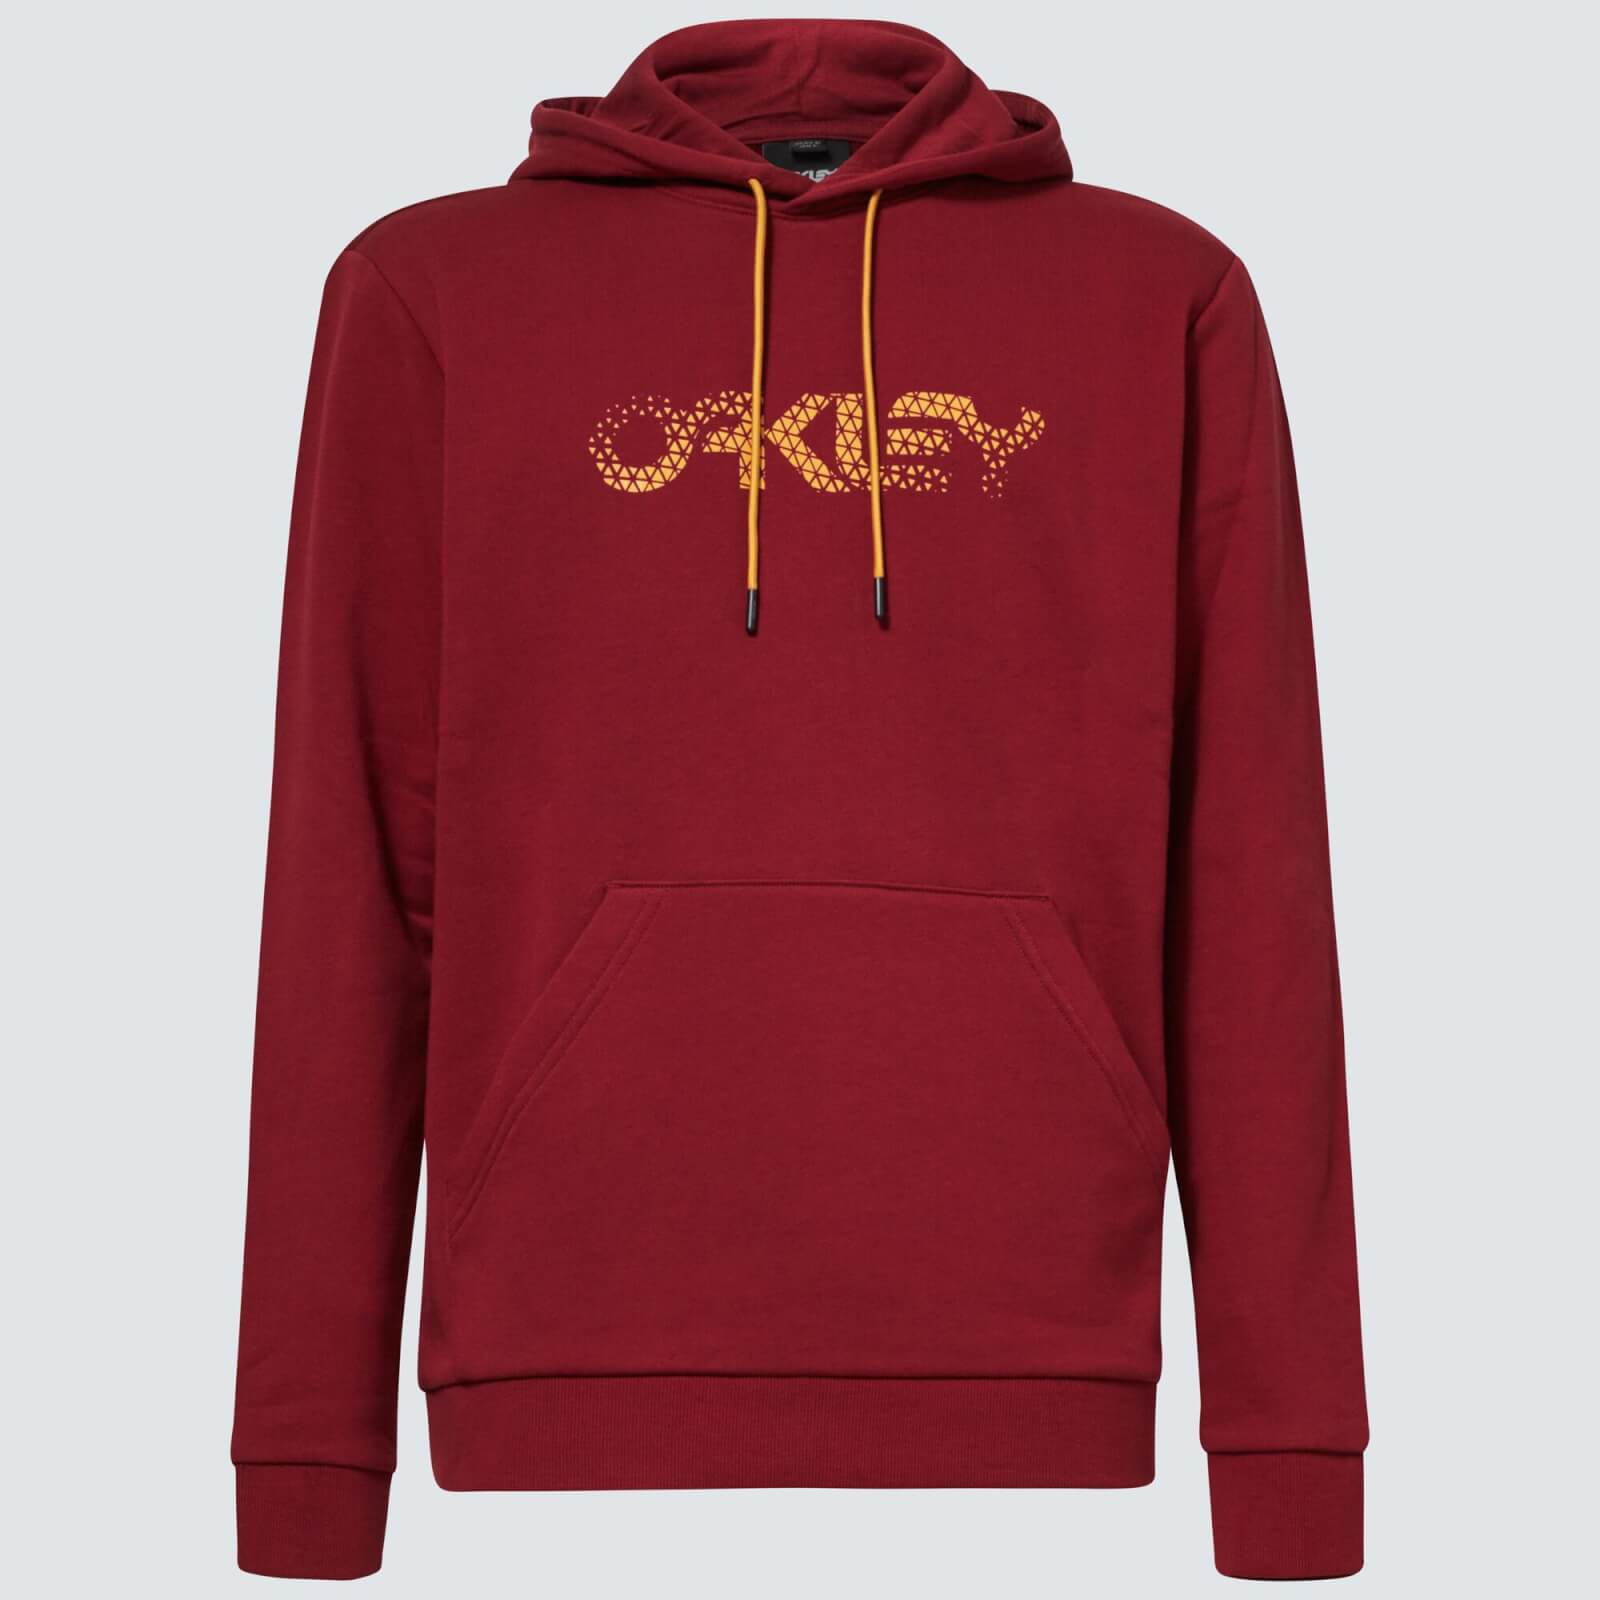 Oakley The Post PO Hoodie – XL – Iron red